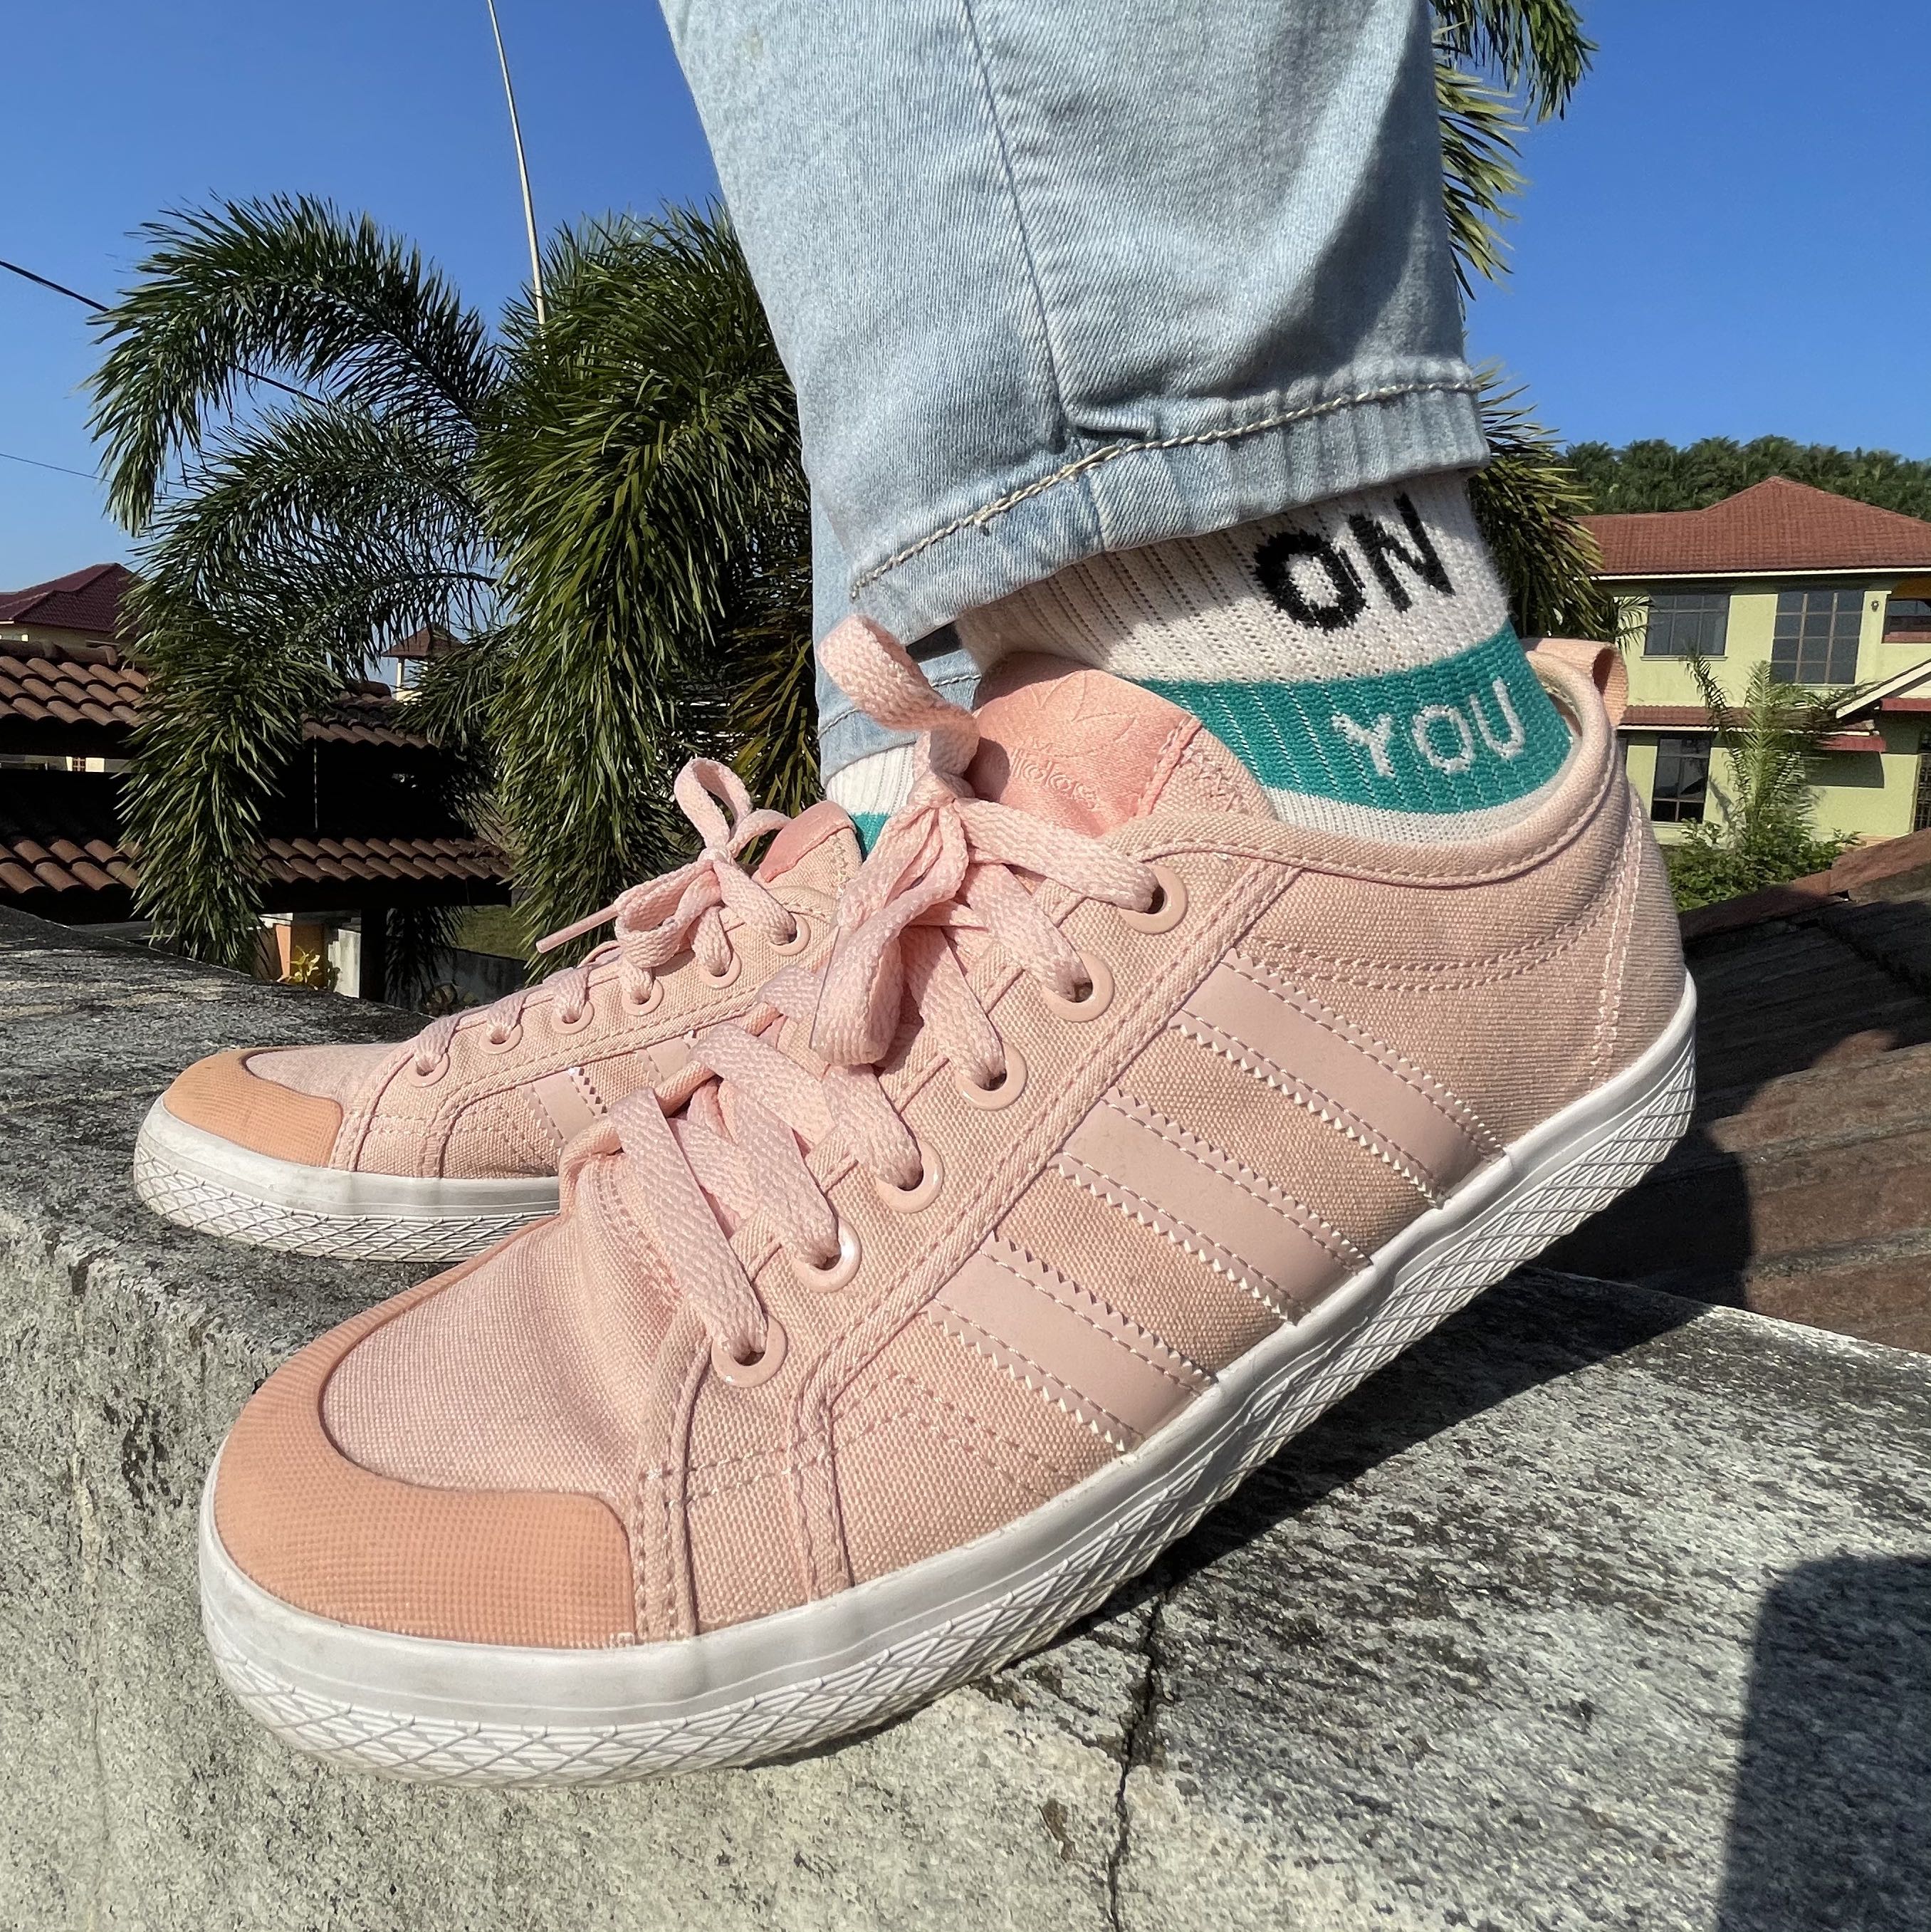 Slapper af barm illoyalitet ADIDAS ORIGINALS Canvas Honey Lo in Pink, Women's Fashion, Footwear,  Sneakers on Carousell